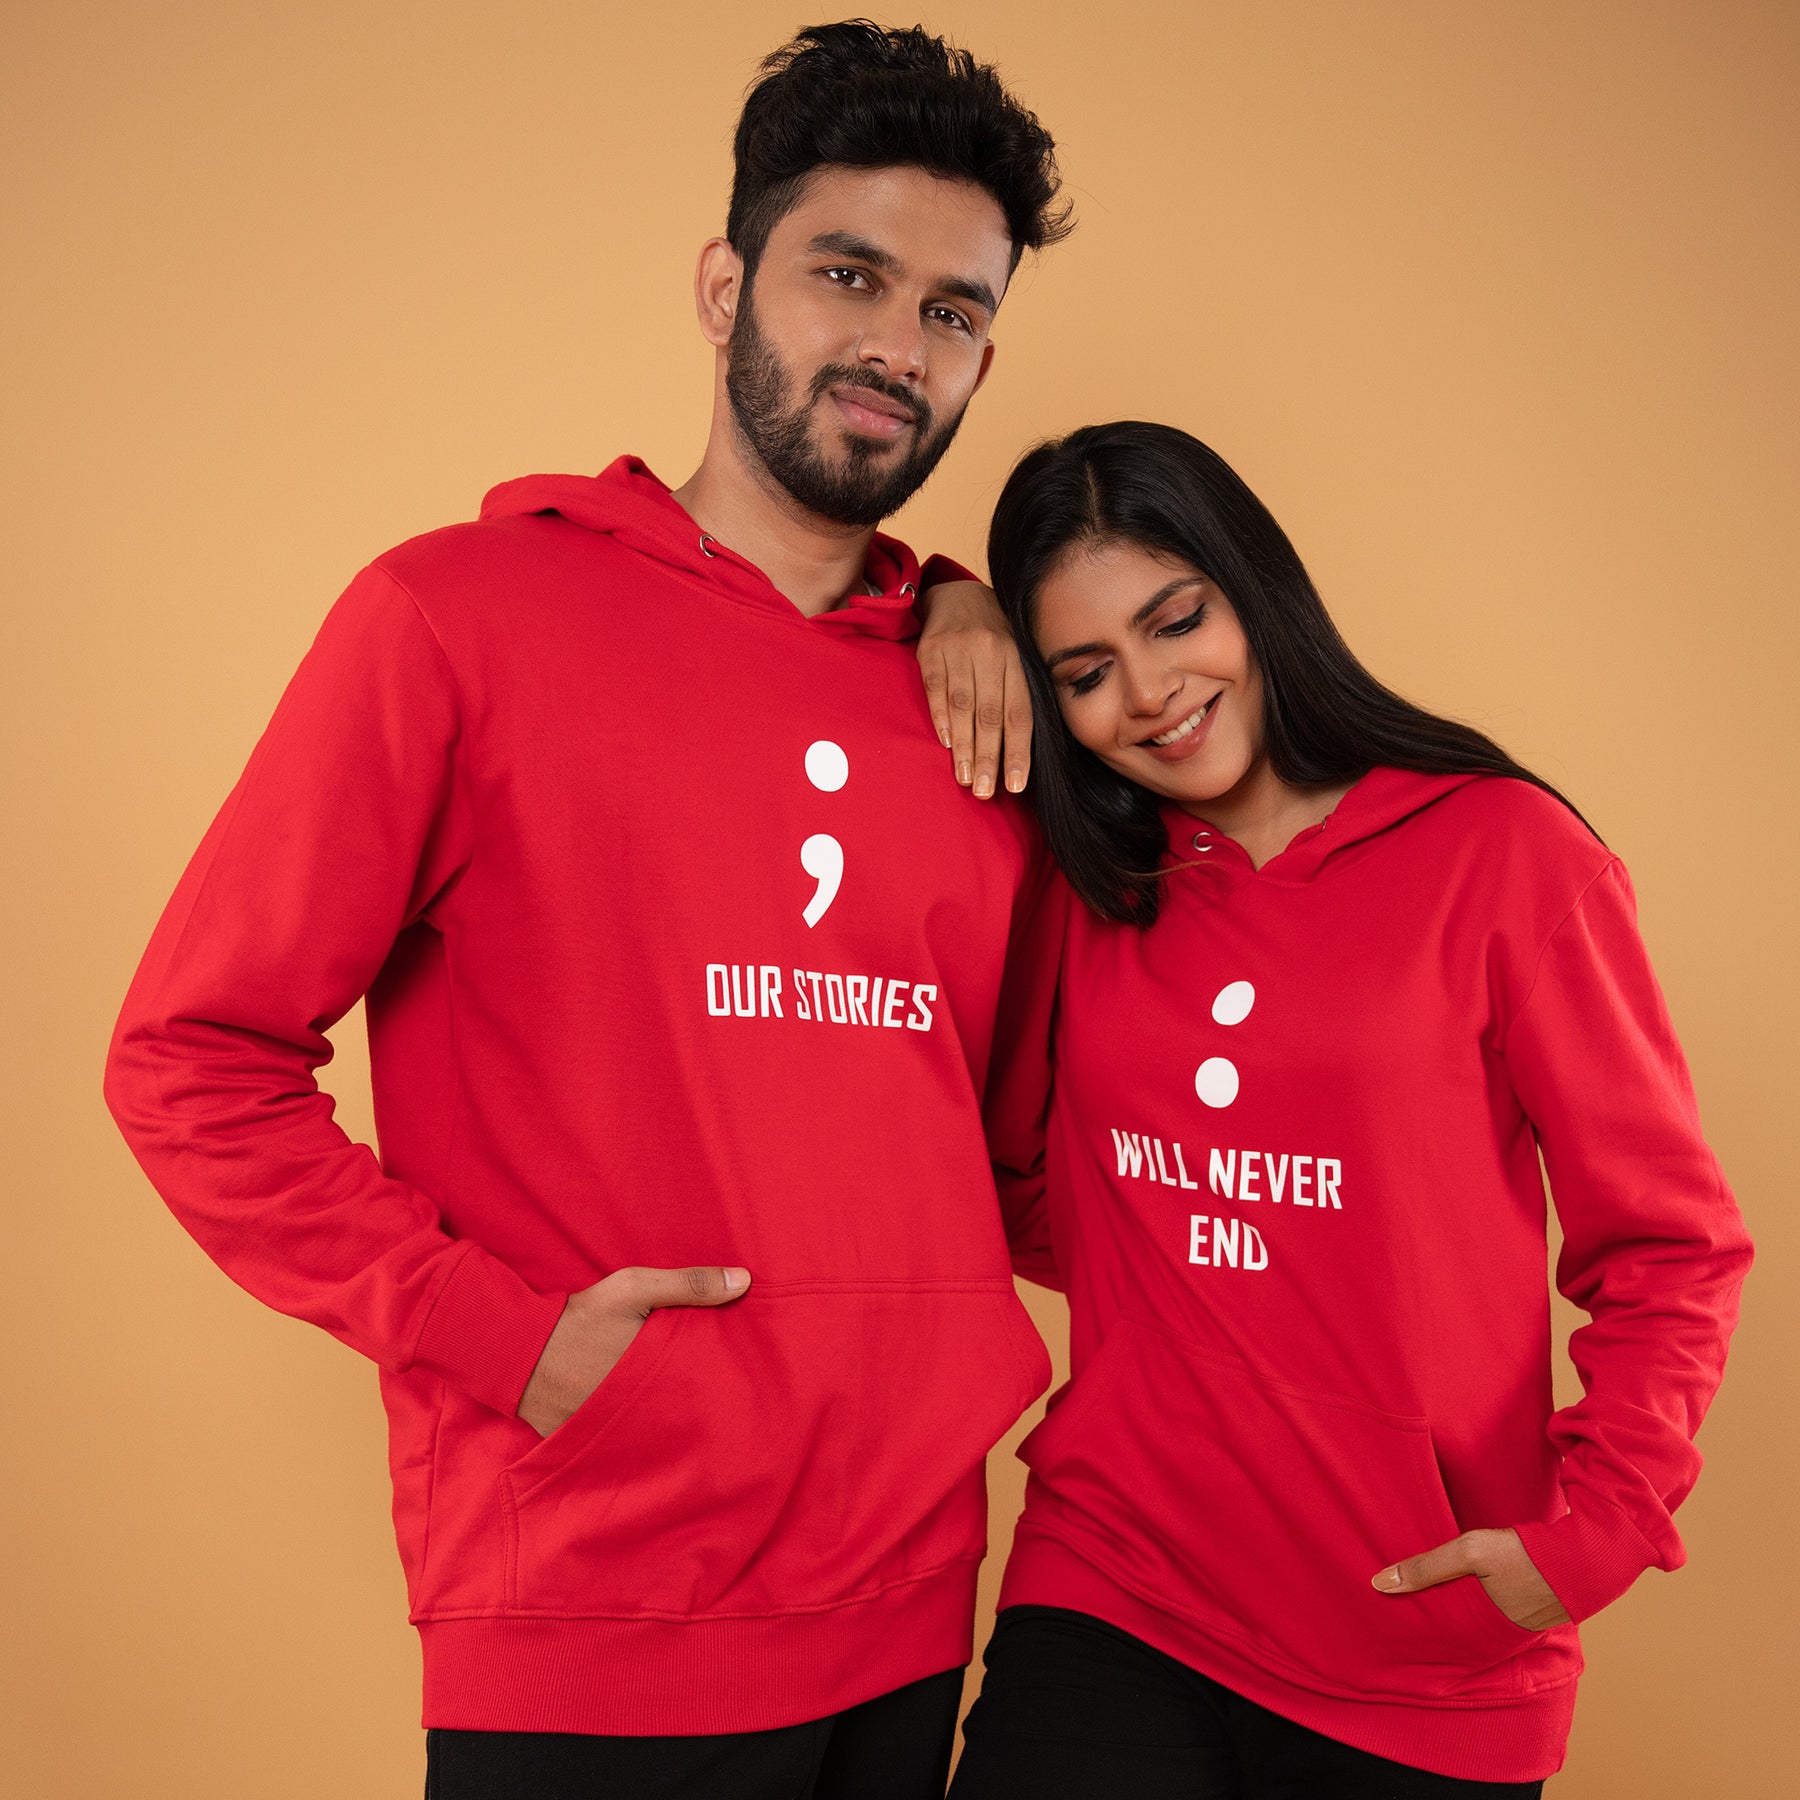 our-stories-will-never-end-red-couple-hoodies-gogirgit-com_ee498014-db57-4429-ad88-72279bb78ad3